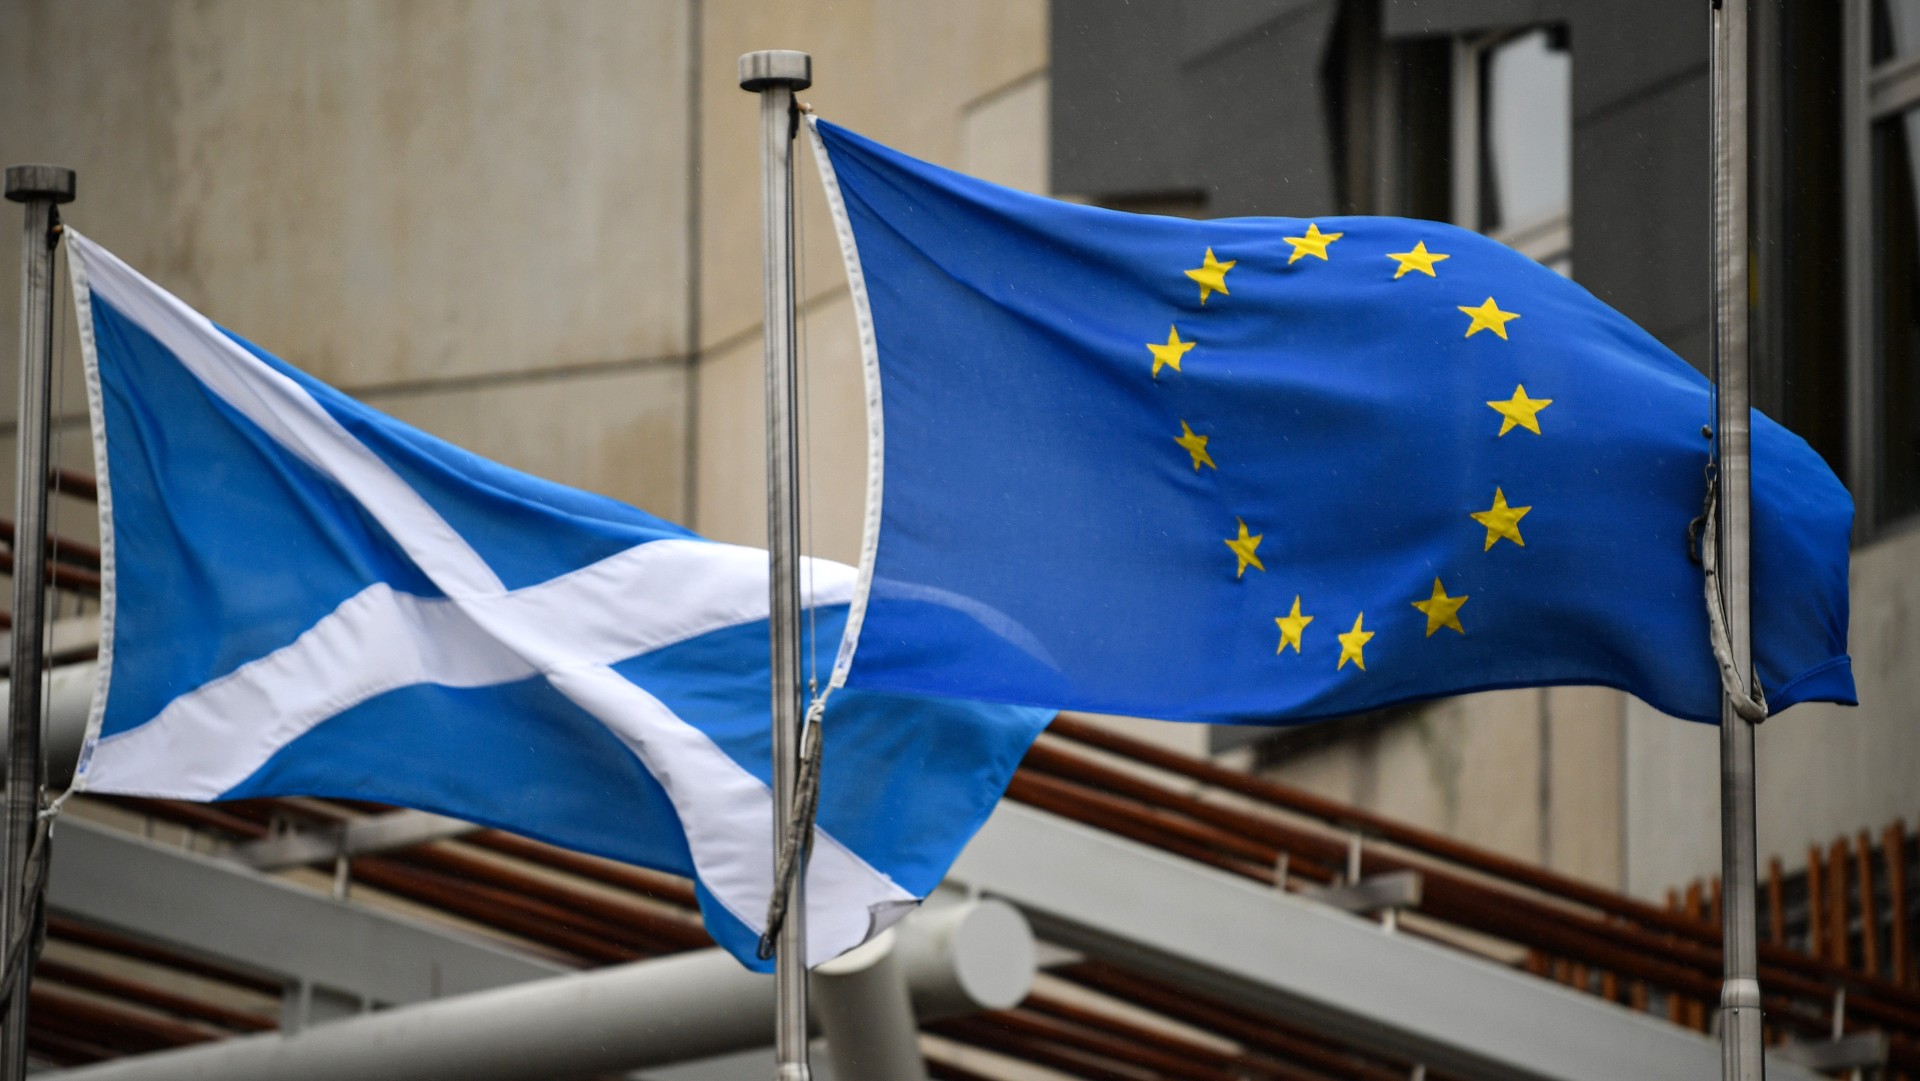 The Scottish Saltire and EU flag fly side by side in Edinburgh